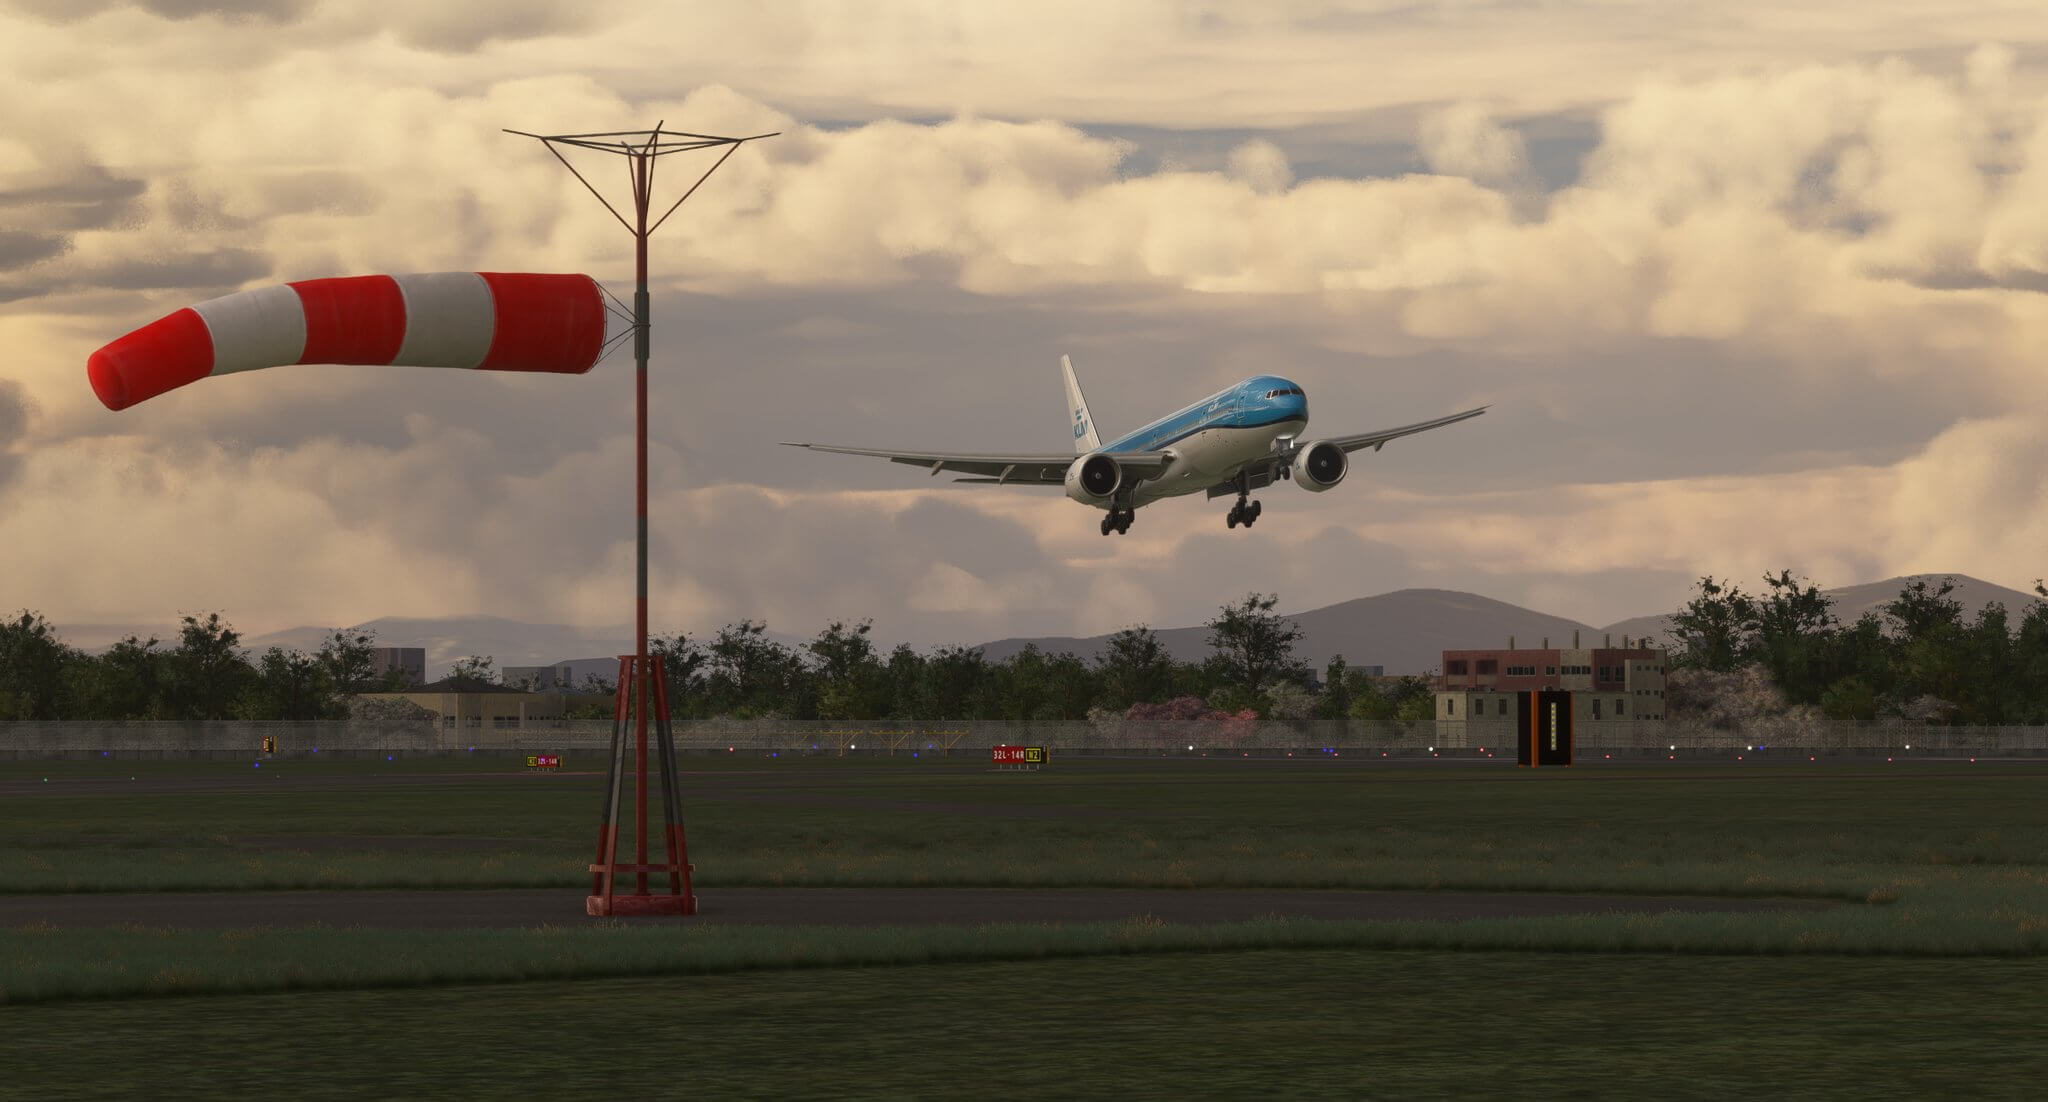 A KLM Boeing 777 with landing gear and flaps lowered on short final to land, with a wind sock next to the runway showing strong gusts.